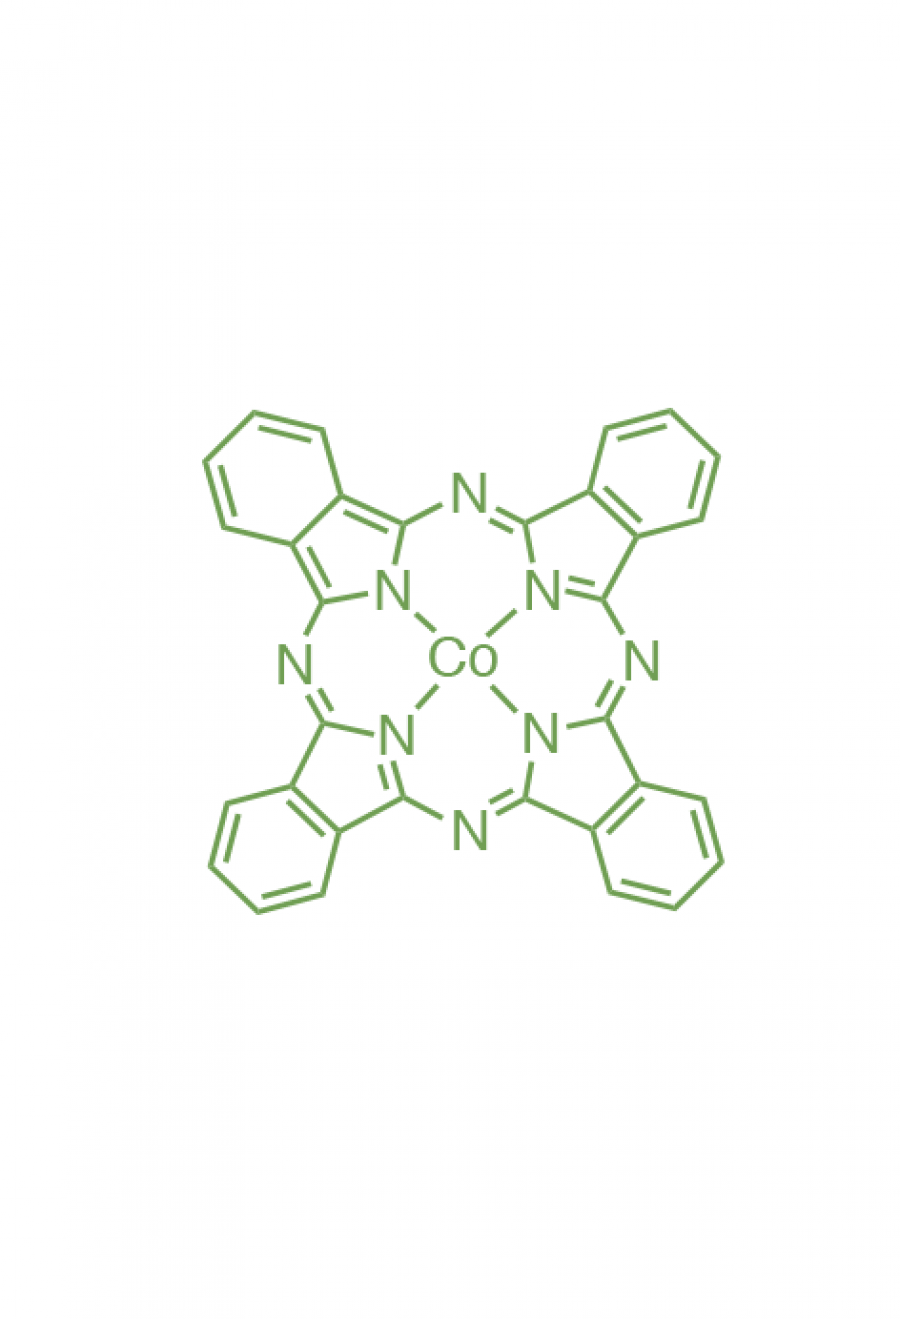 cobalt(II) phthalocyanine  | Porphychem Expert porphyrin synthesis for research & industry